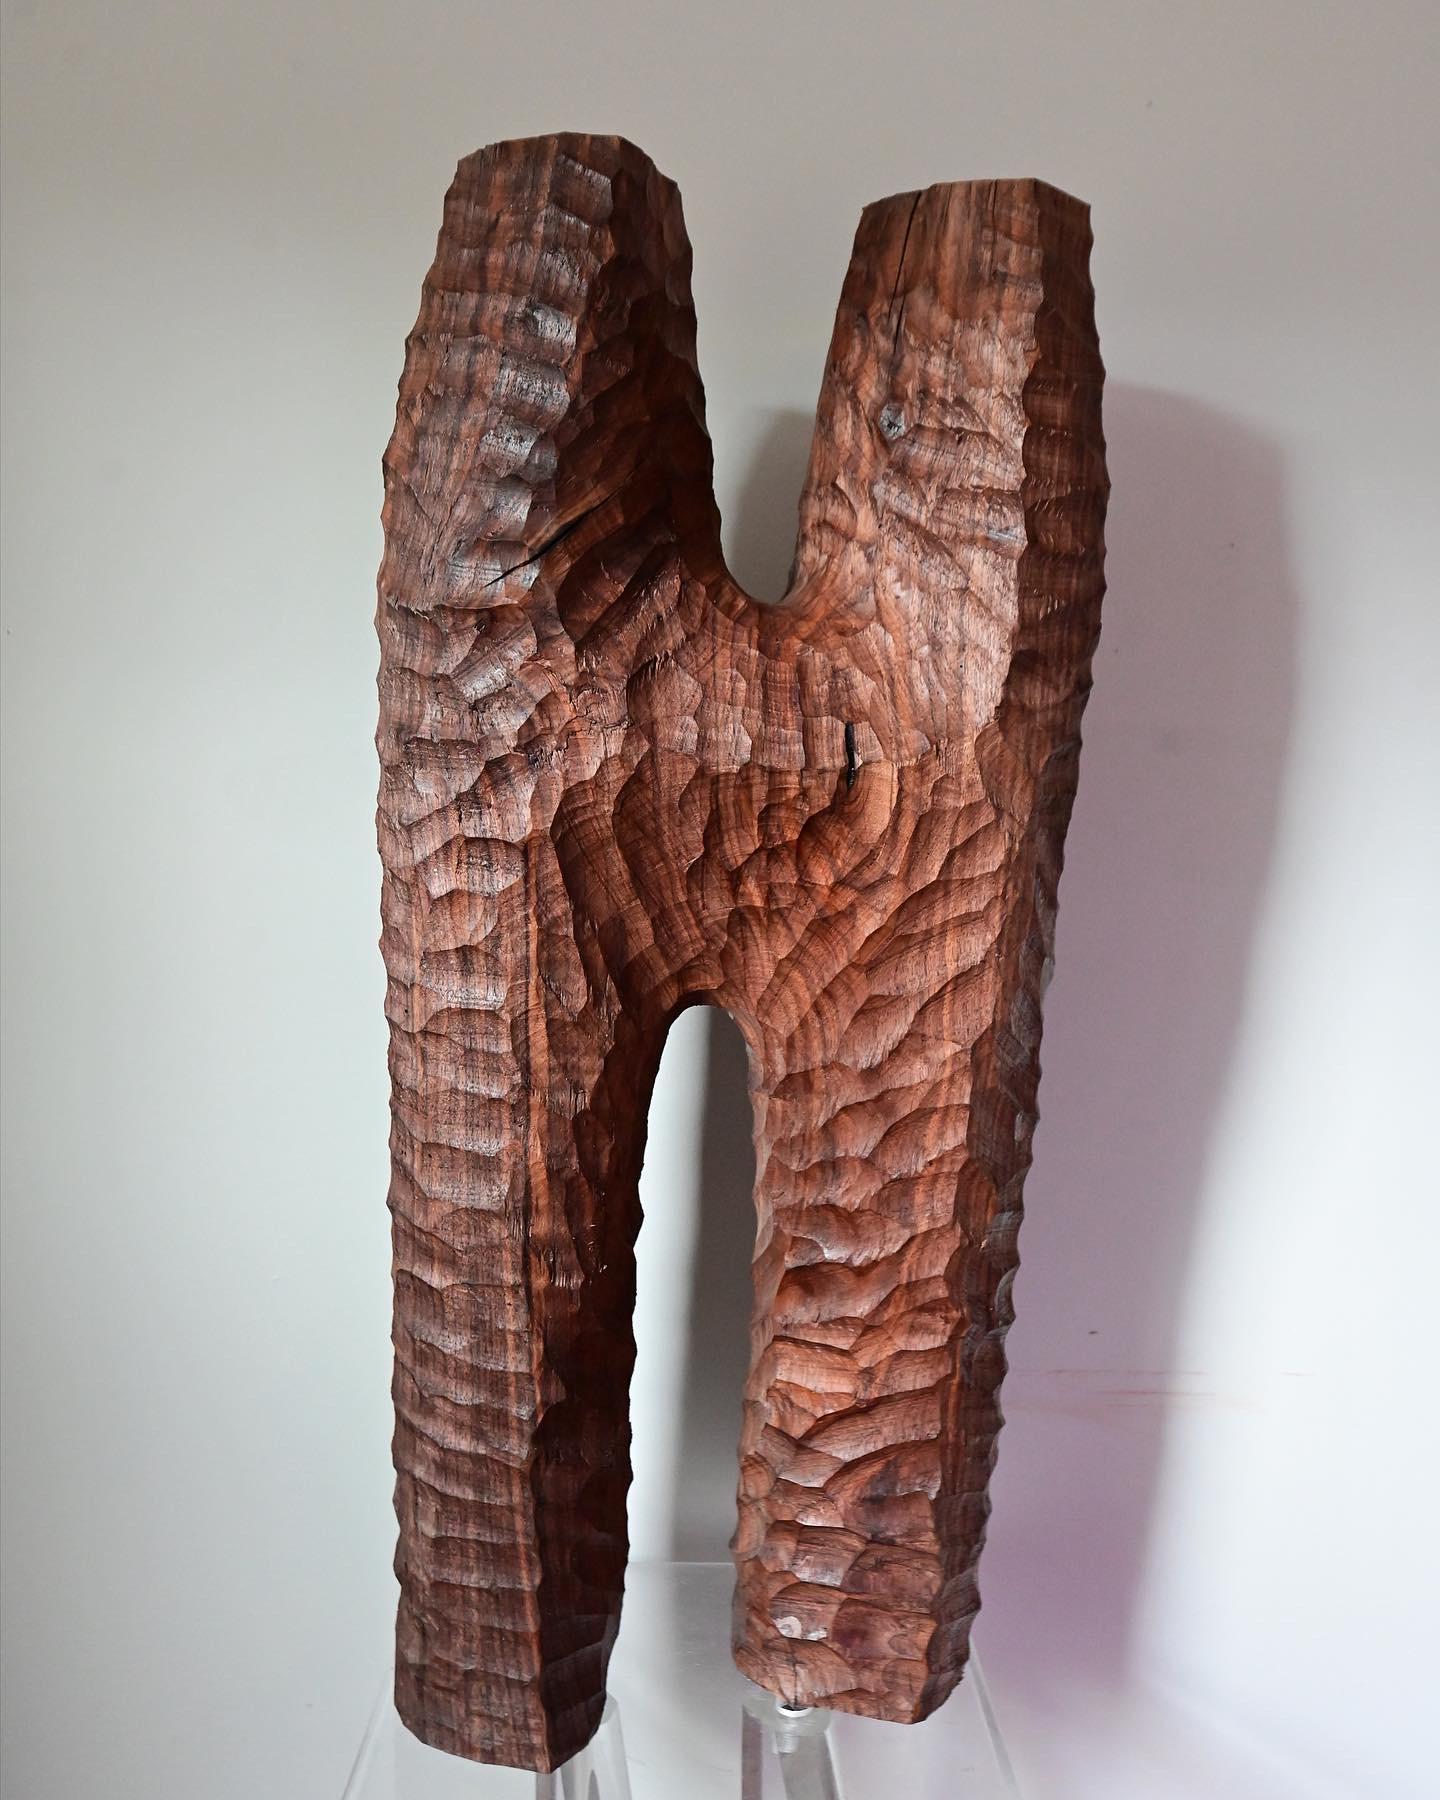 Brutalist Abstract Sculpted Walnut Art Object For Sale